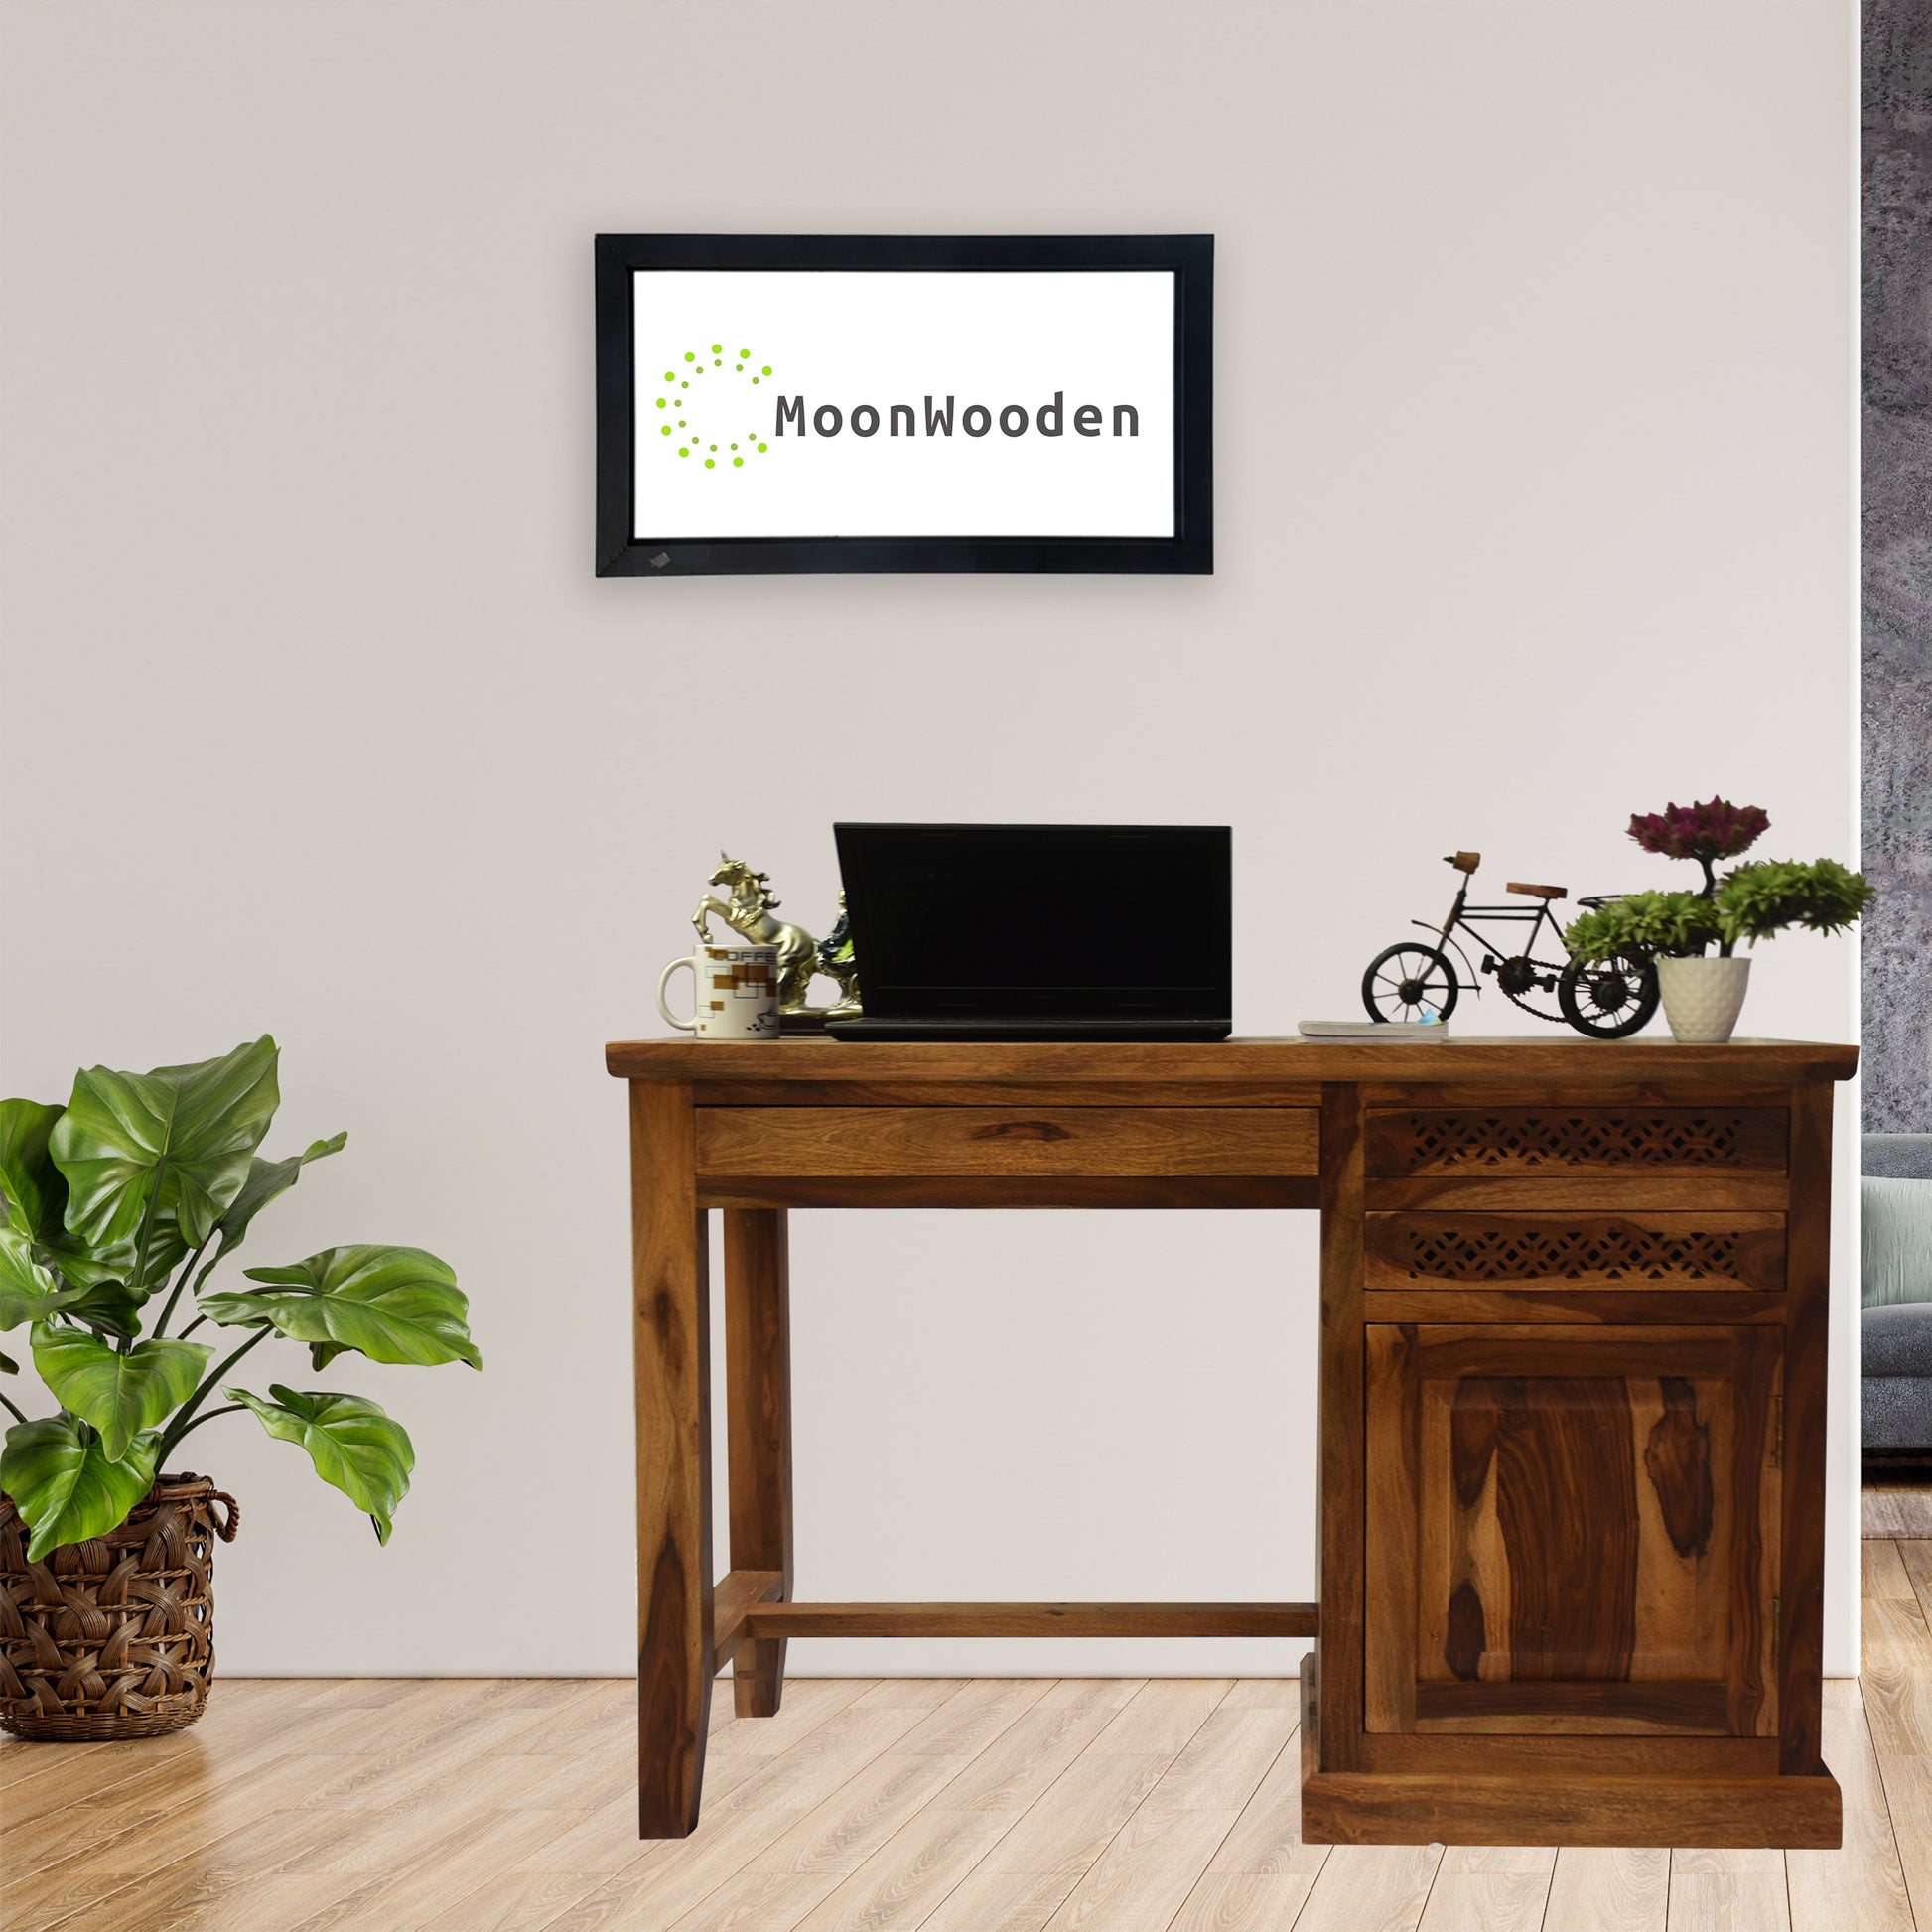 MoonWooden Multi-Purpose Laptop Table, Study Table, Bed Table